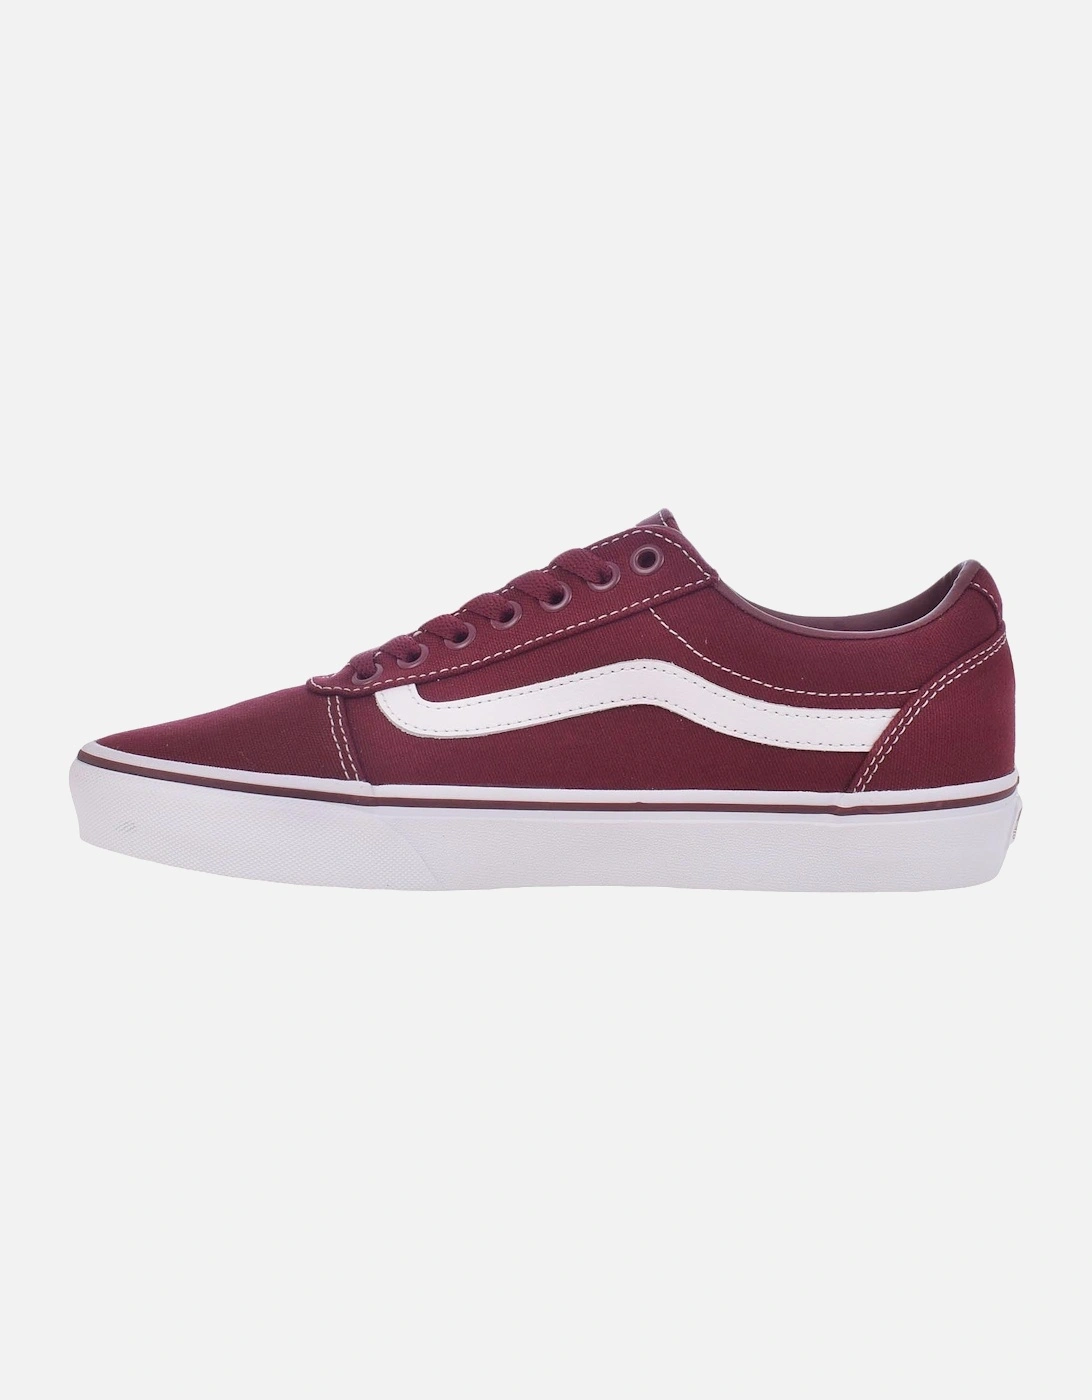 Mens Ward Canvas Trainers - Port/White